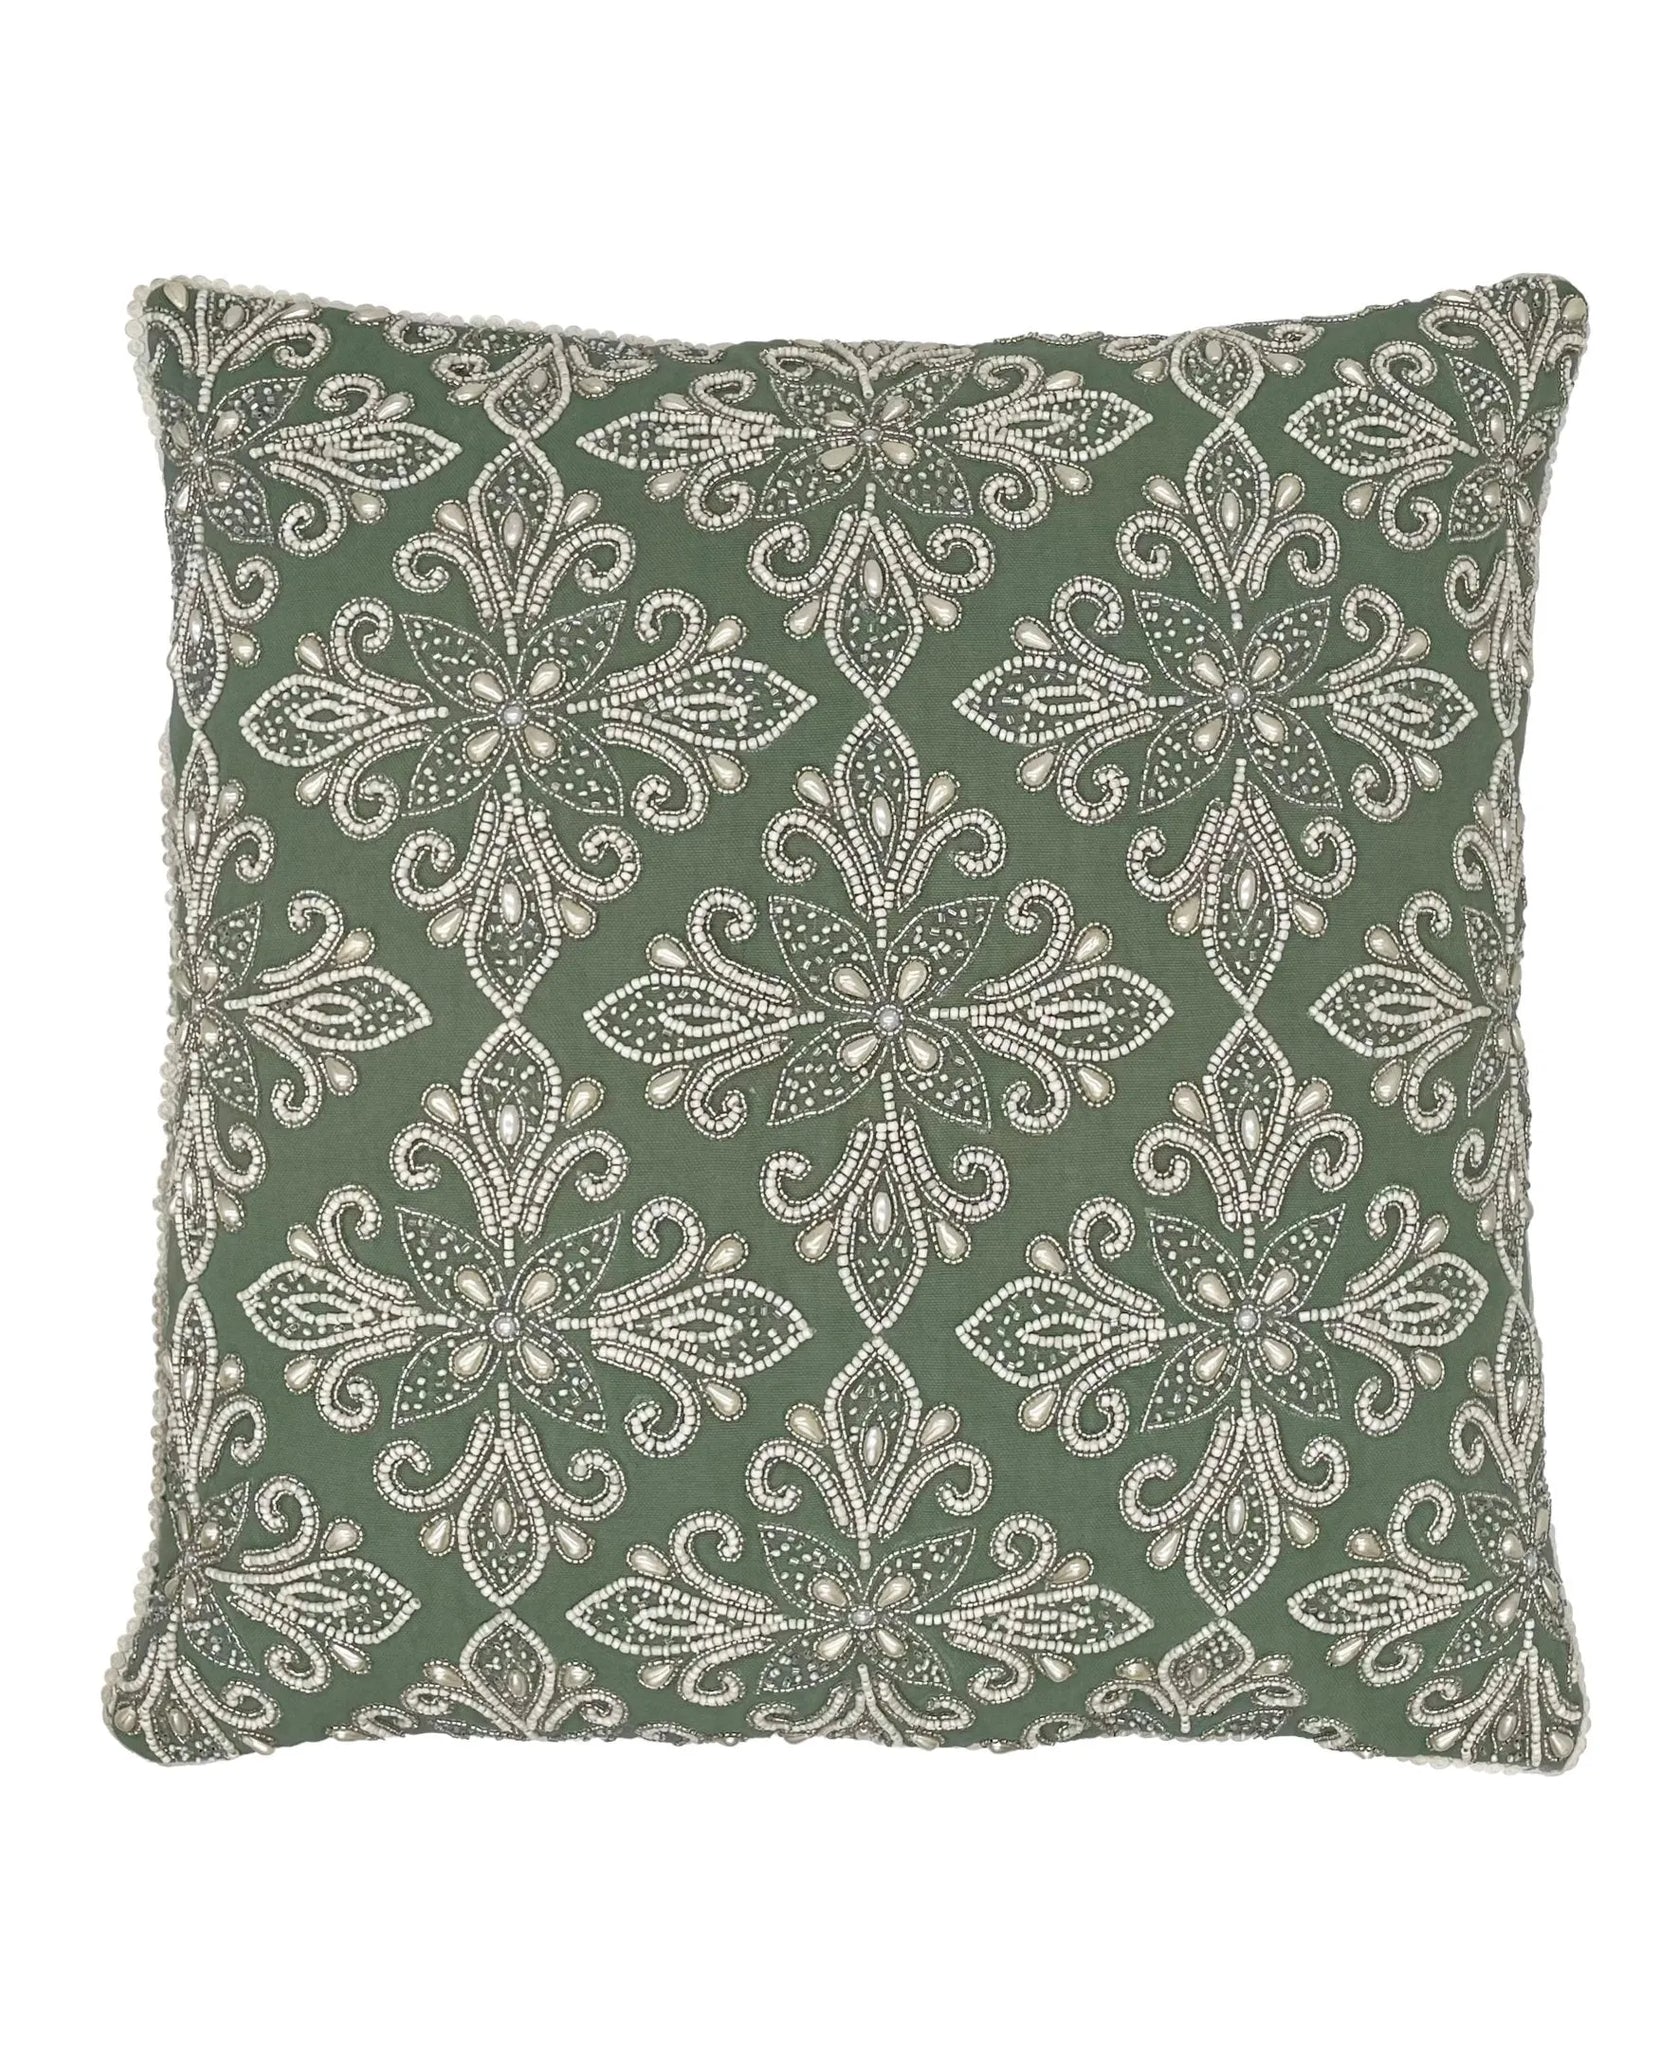 Imperial Medallion Beaded Pillow, Green Bay - 20"x 20" home decor - Mod Lifestyles